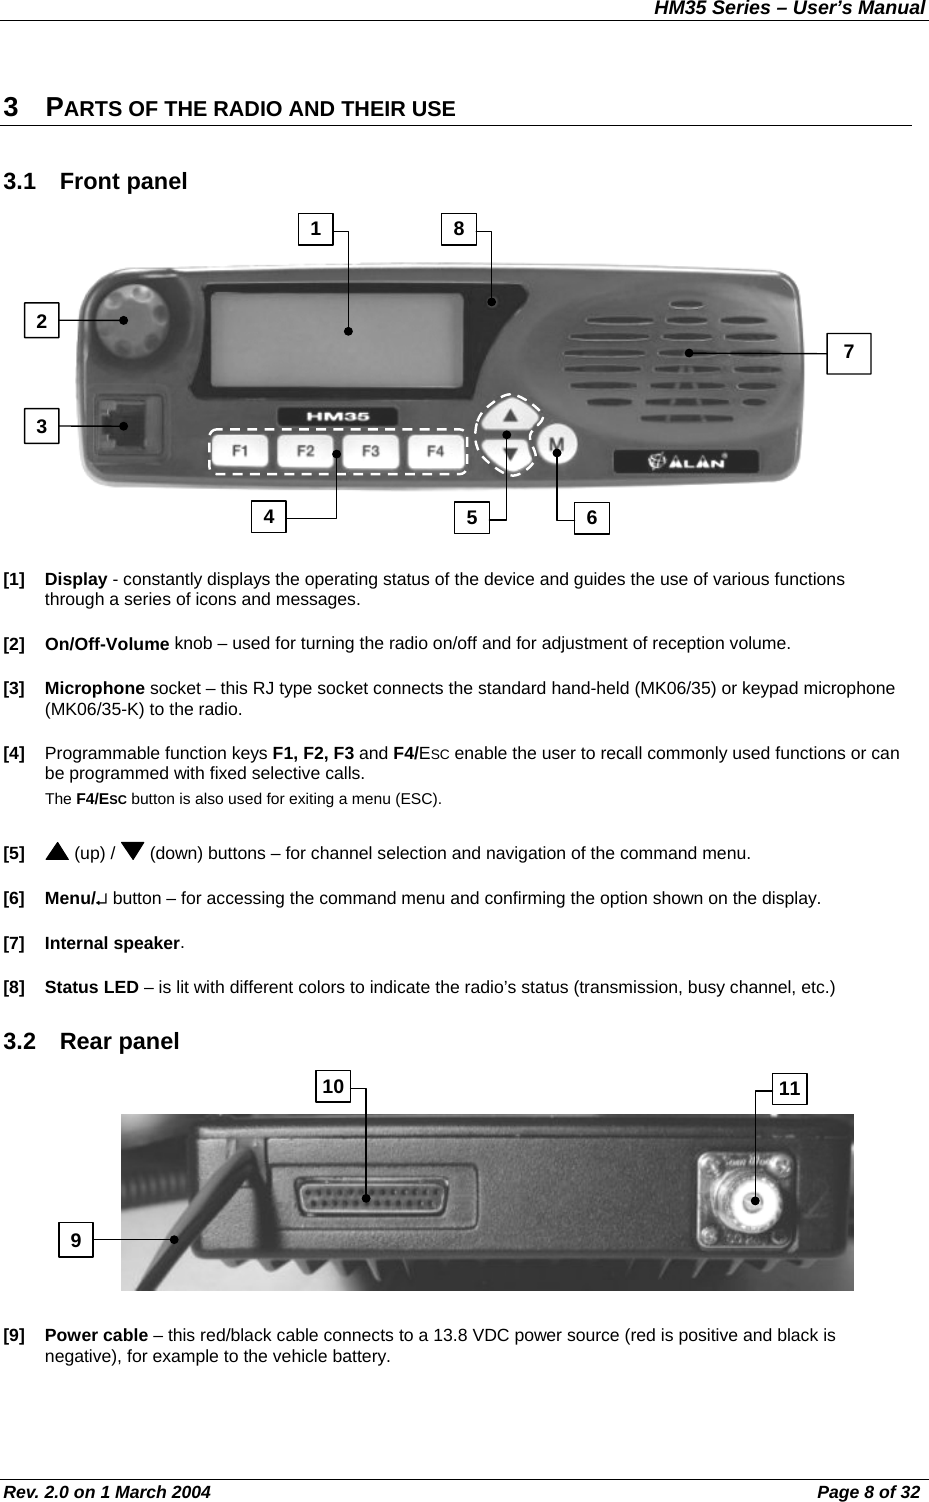 HM35 Series – User’s Manual Rev. 2.0 on 1 March 2004  Page 8 of 32 3 PARTS OF THE RADIO AND THEIR USE 3.1 Front panel [1] Display - constantly displays the operating status of the device and guides the use of various functions through a series of icons and messages. [2] On/Off-Volume knob – used for turning the radio on/off and for adjustment of reception volume. [3] Microphone socket – this RJ type socket connects the standard hand-held (MK06/35) or keypad microphone (MK06/35-K) to the radio. [4]  Programmable function keys F1, F2, F3 and F4/ESC enable the user to recall commonly used functions or can be programmed with fixed selective calls. The F4/ESC button is also used for exiting a menu (ESC). [5]   (up) /   (down) buttons – for channel selection and navigation of the command menu. [6] Menu/↵ button – for accessing the command menu and confirming the option shown on the display. [7] Internal speaker. [8] Status LED – is lit with different colors to indicate the radio’s status (transmission, busy channel, etc.) 3.2 Rear panel [9] Power cable – this red/black cable connects to a 13.8 VDC power source (red is positive and black is negative), for example to the vehicle battery. 9 10 11 3 7 2 651  84 